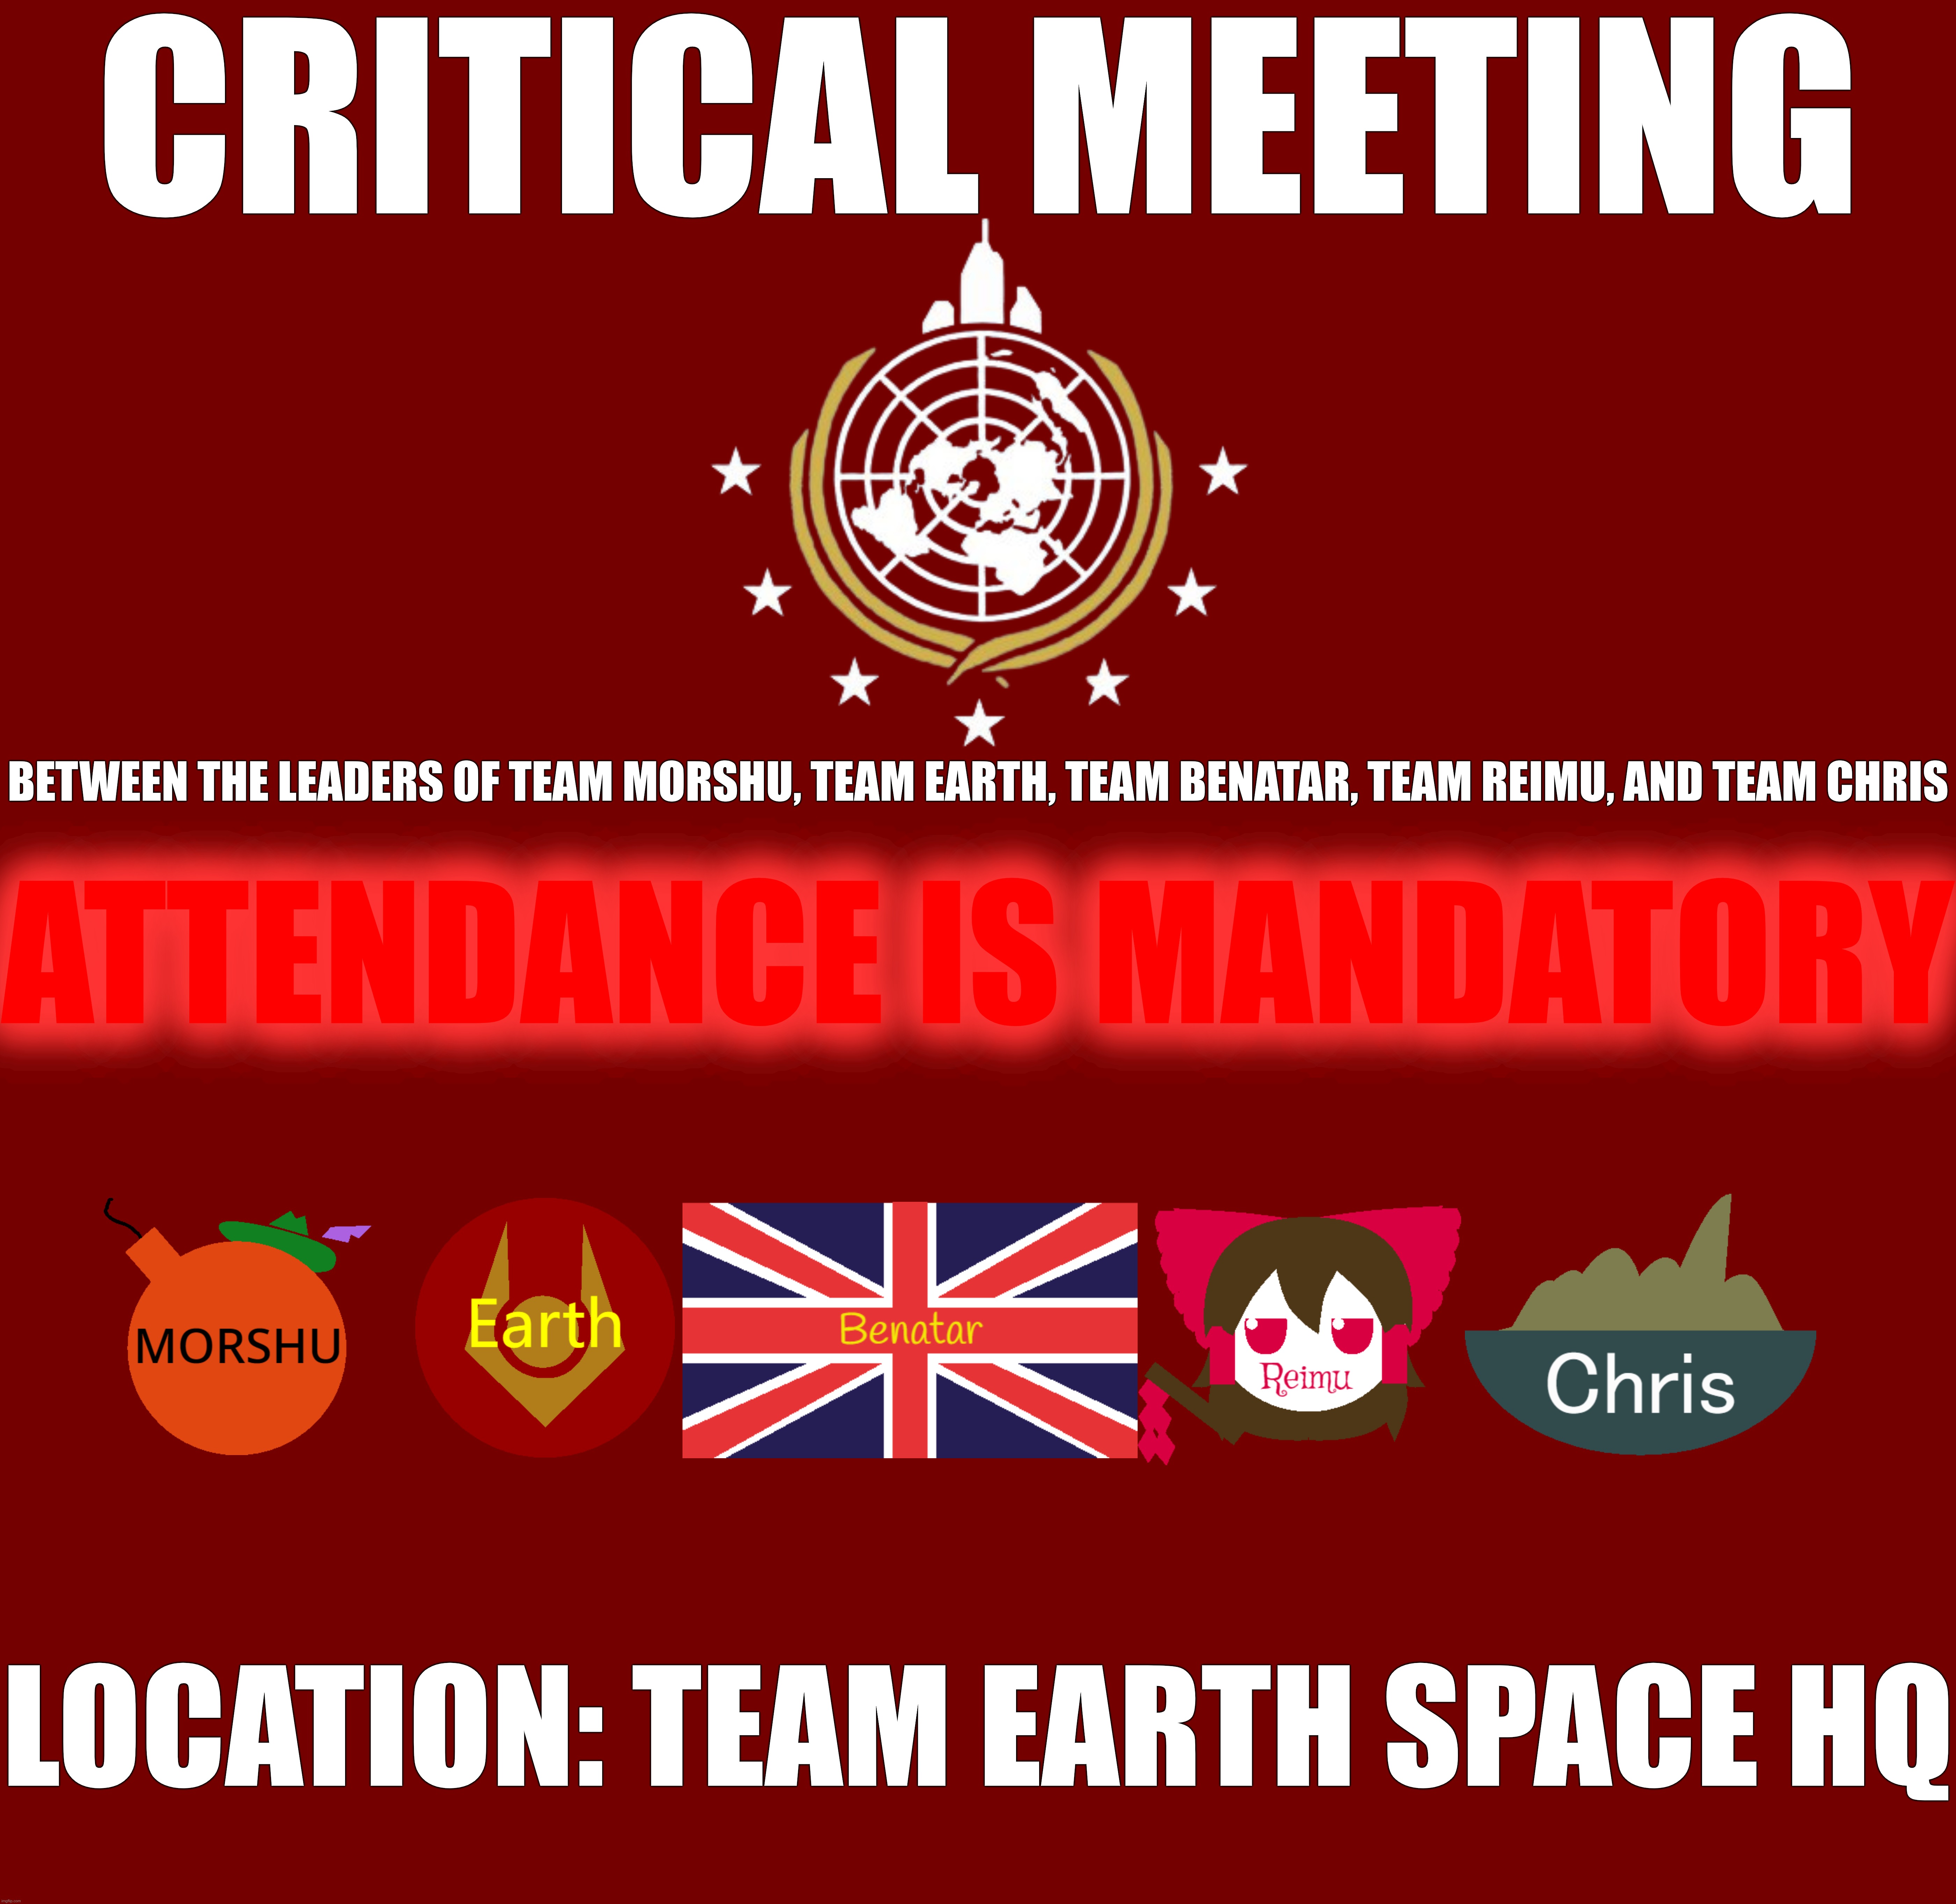 EMERGENCY MEETING ON WEDNESDAY THIS WEEK | CRITICAL MEETING; BETWEEN THE LEADERS OF TEAM MORSHU, TEAM EARTH, TEAM BENATAR, TEAM REIMU, AND TEAM CHRIS; ATTENDANCE IS MANDATORY; LOCATION: TEAM EARTH SPACE HQ | image tagged in concerns mojo jojo | made w/ Imgflip meme maker